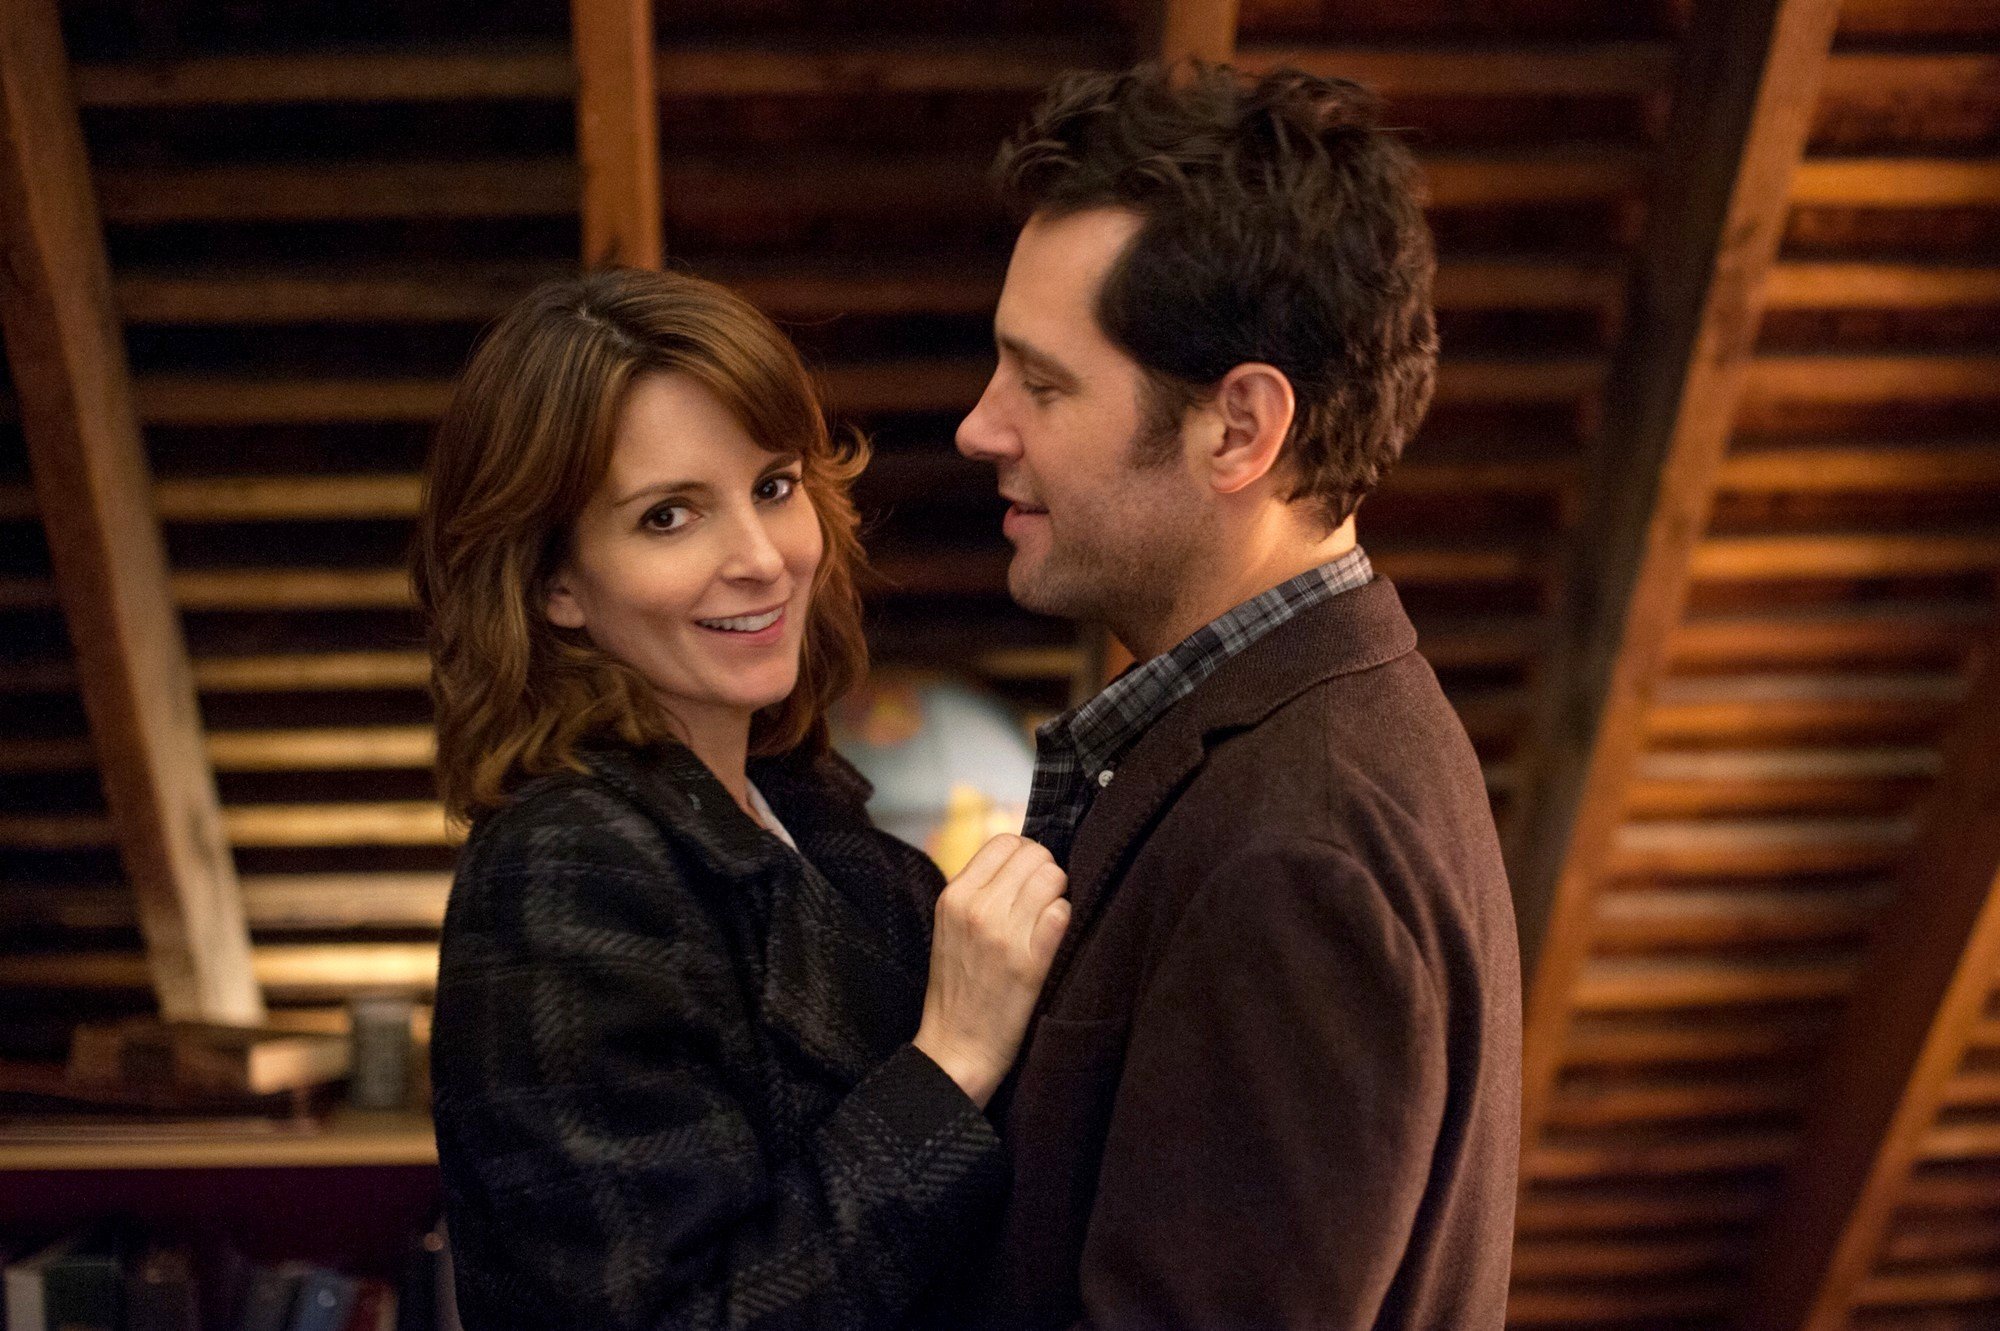 Tina Fey stars as Portia Nathan and Paul Rudd stars as John Pressman in Focus Features' Admission (2013)